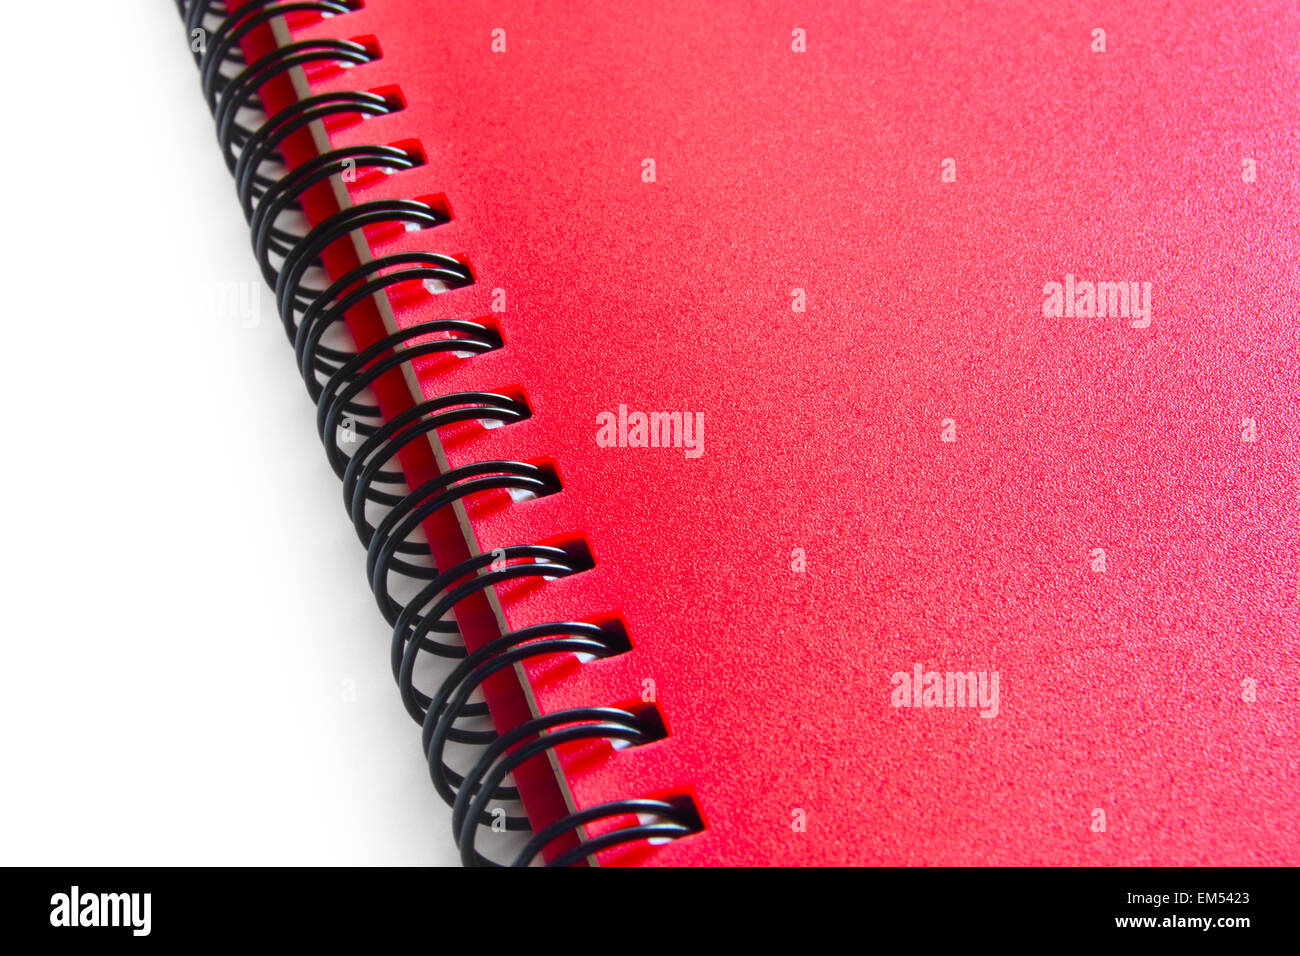 Red Spiral Notebook Isolated on the White Background Stock Photo